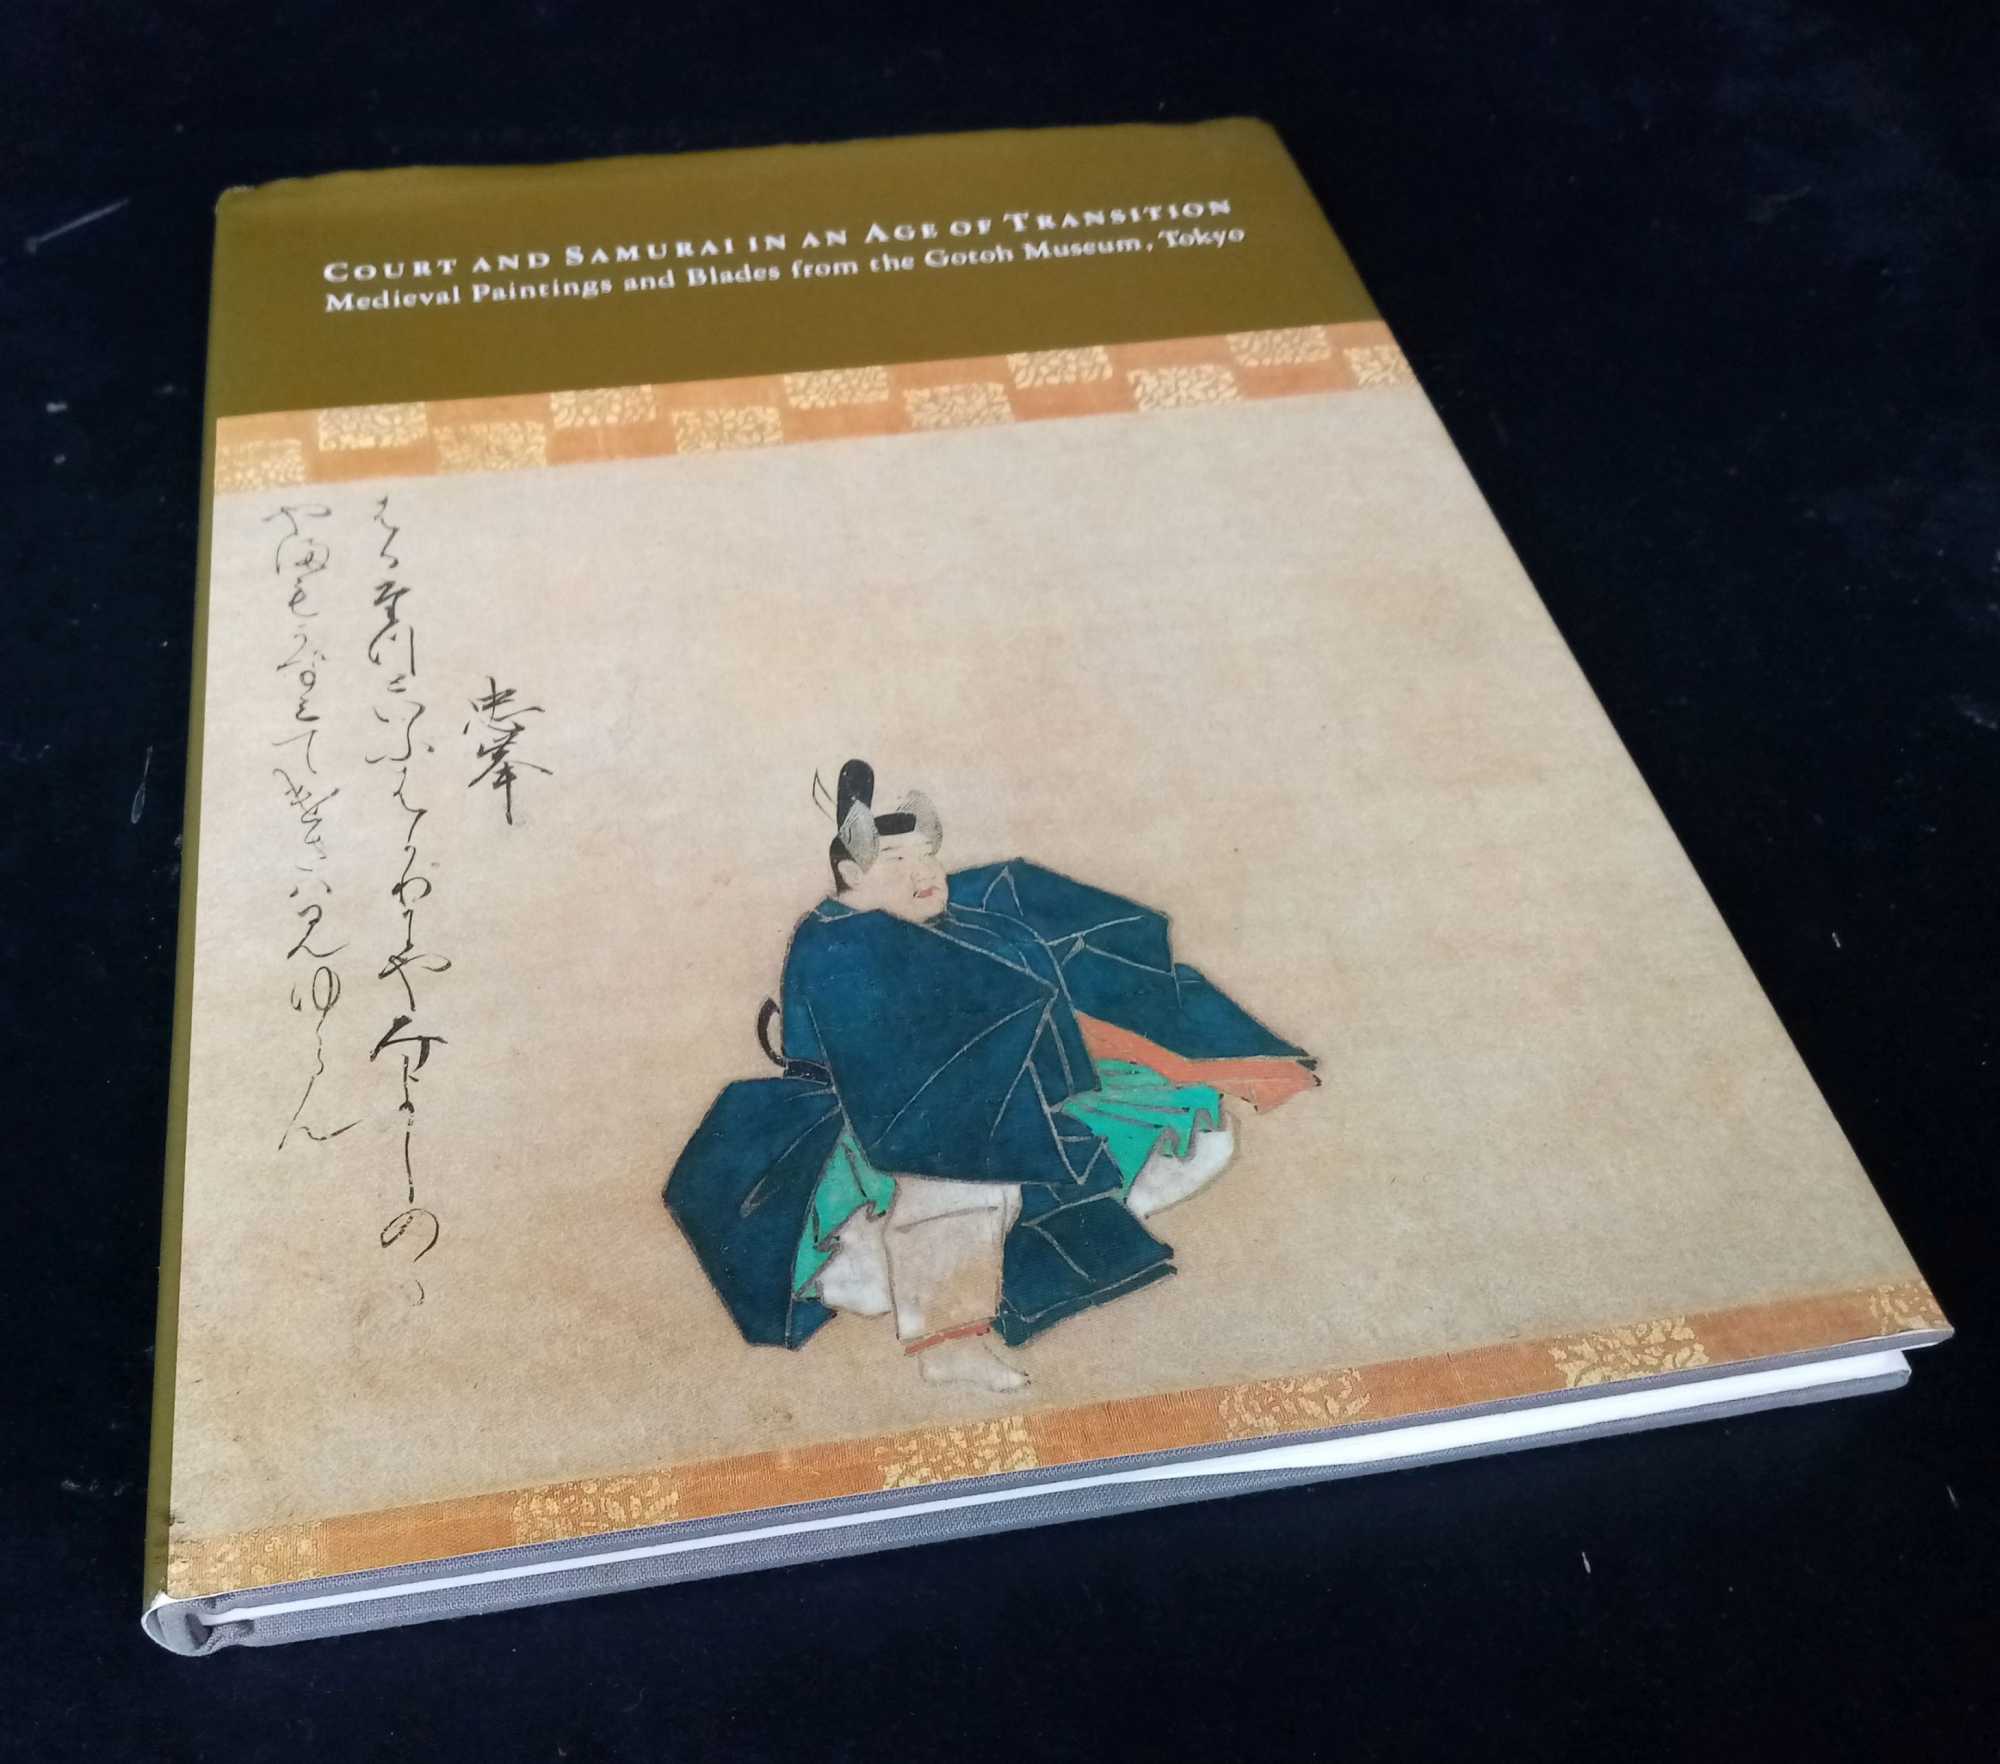 Naomi Noble Richard, ed. - Court and Samurai in an Age of Transition: Medieval Paintings and Blades from the Gotoh Museum, Tokyo